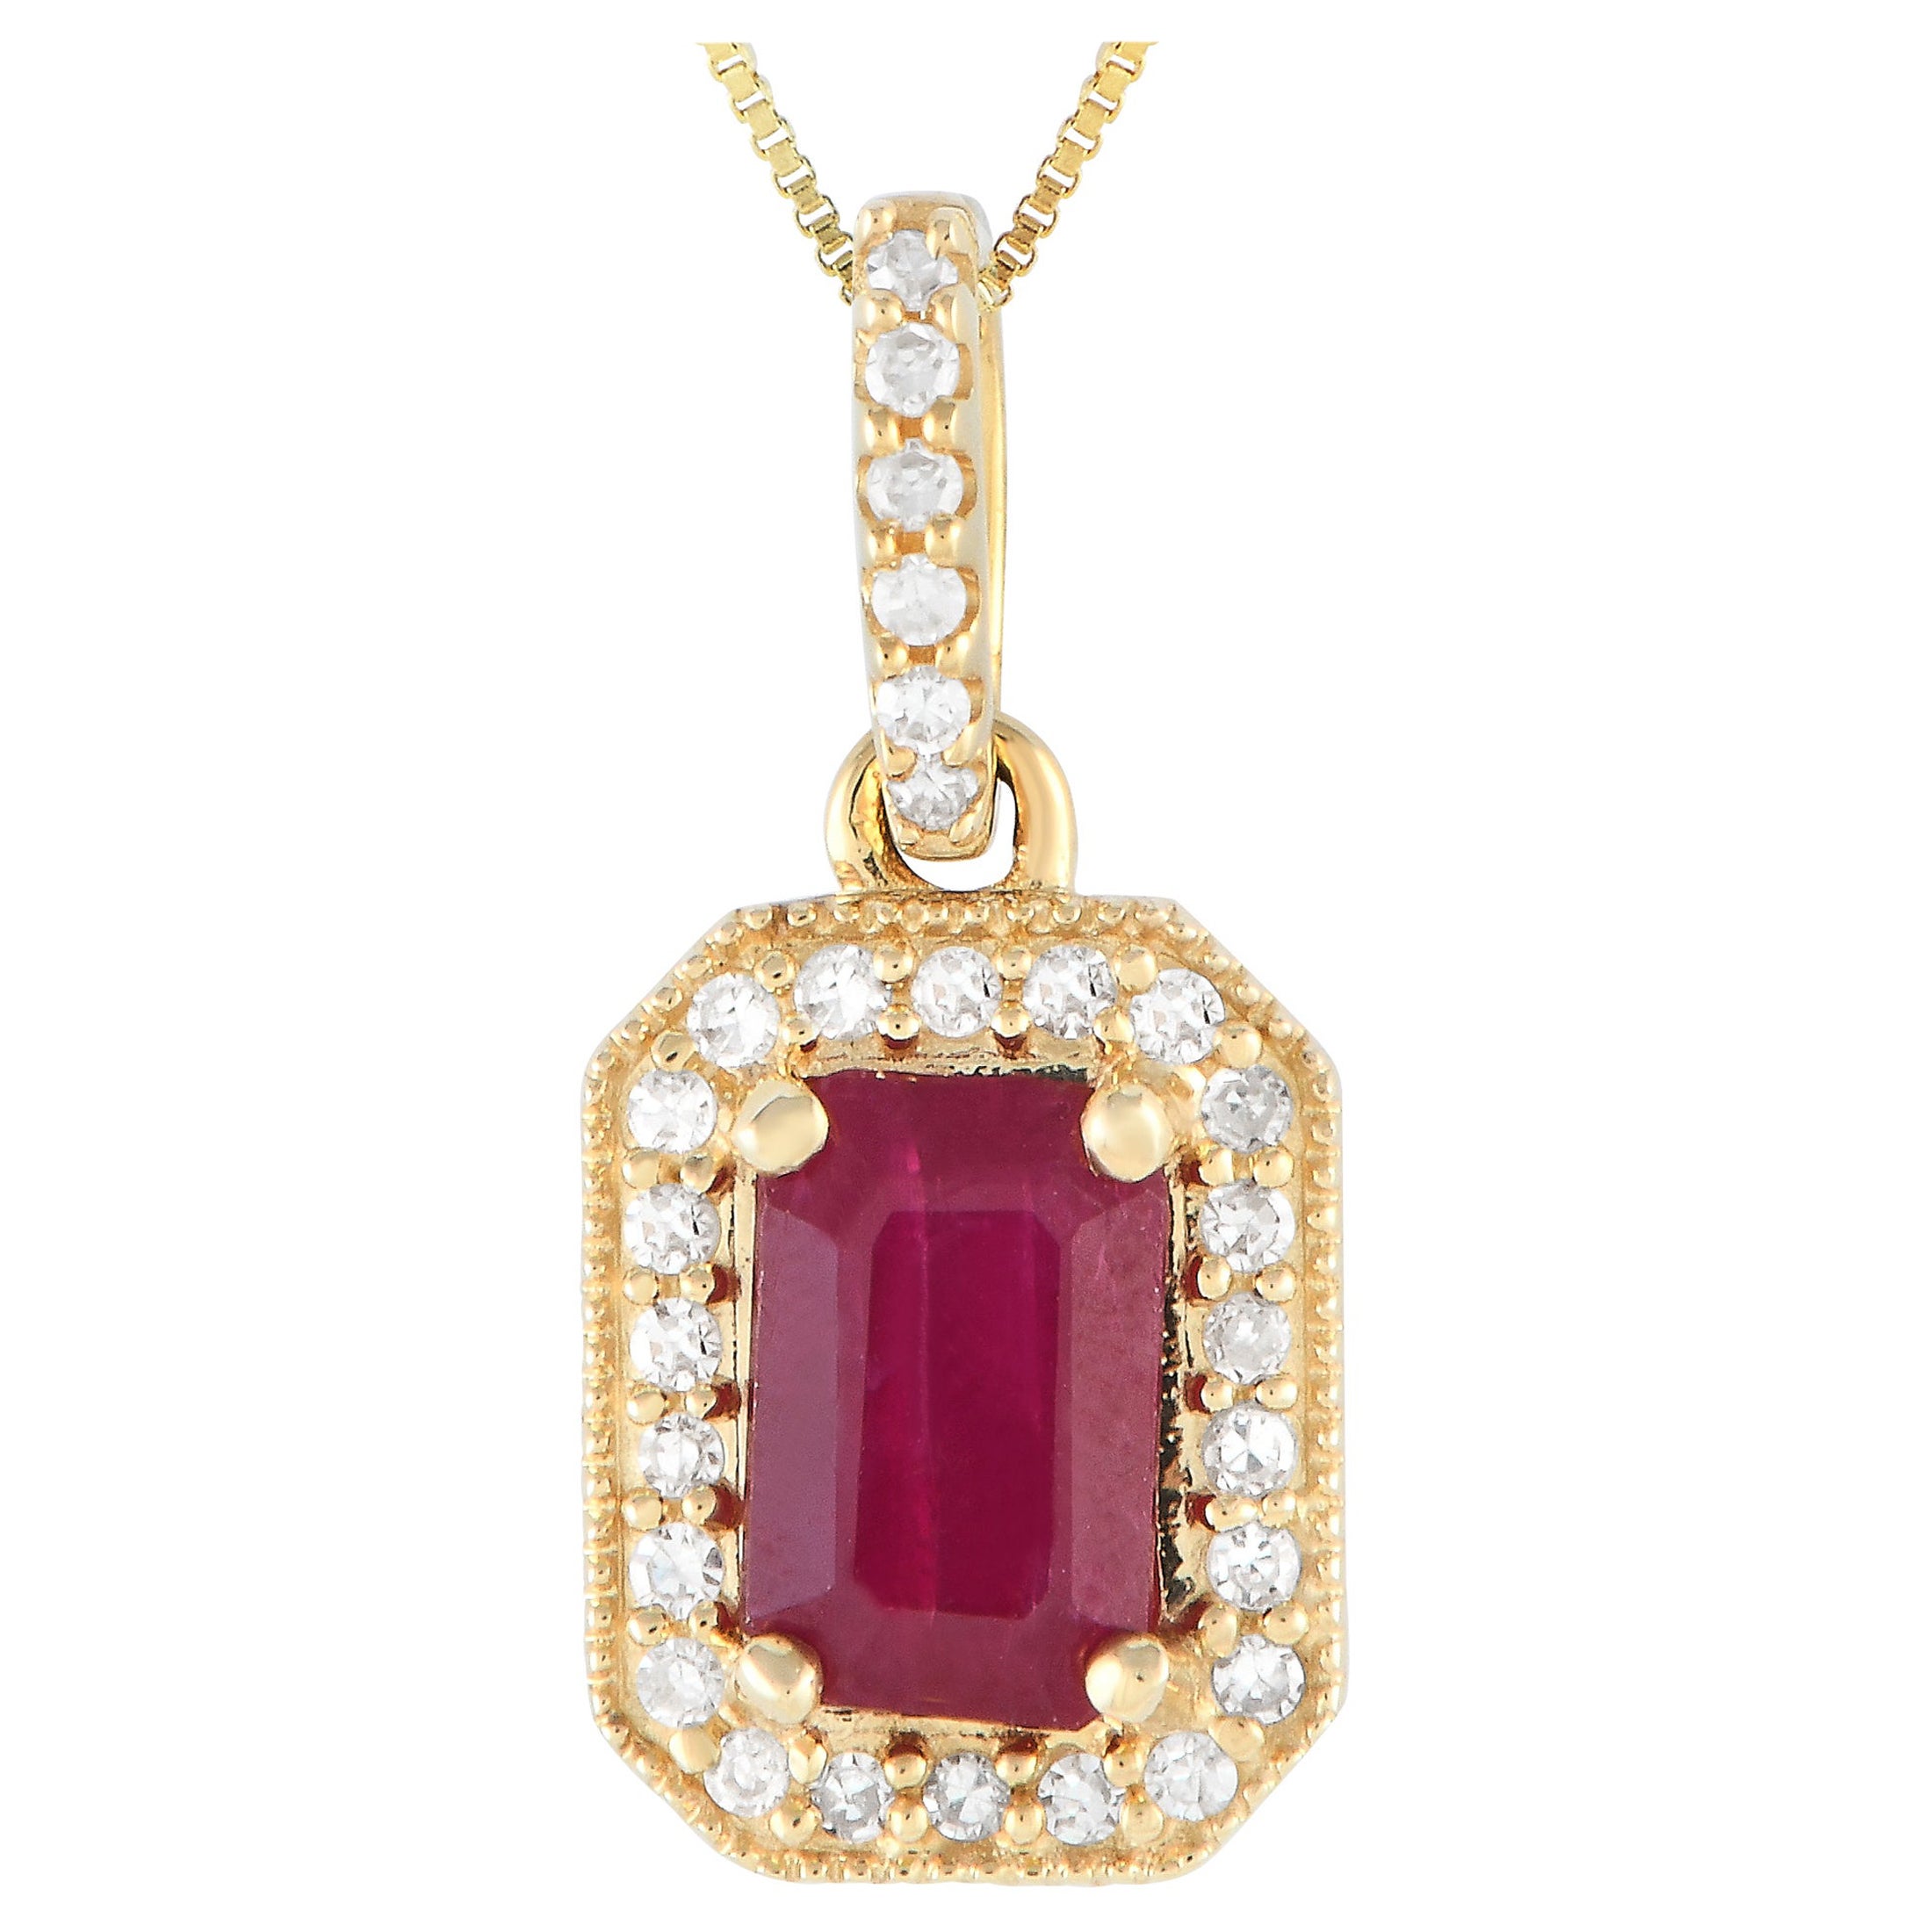 LB Exclusive 14K Yellow Gold 0.10ct Diamond & Ruby Pendant Necklace PD4-16050YRU For Sale